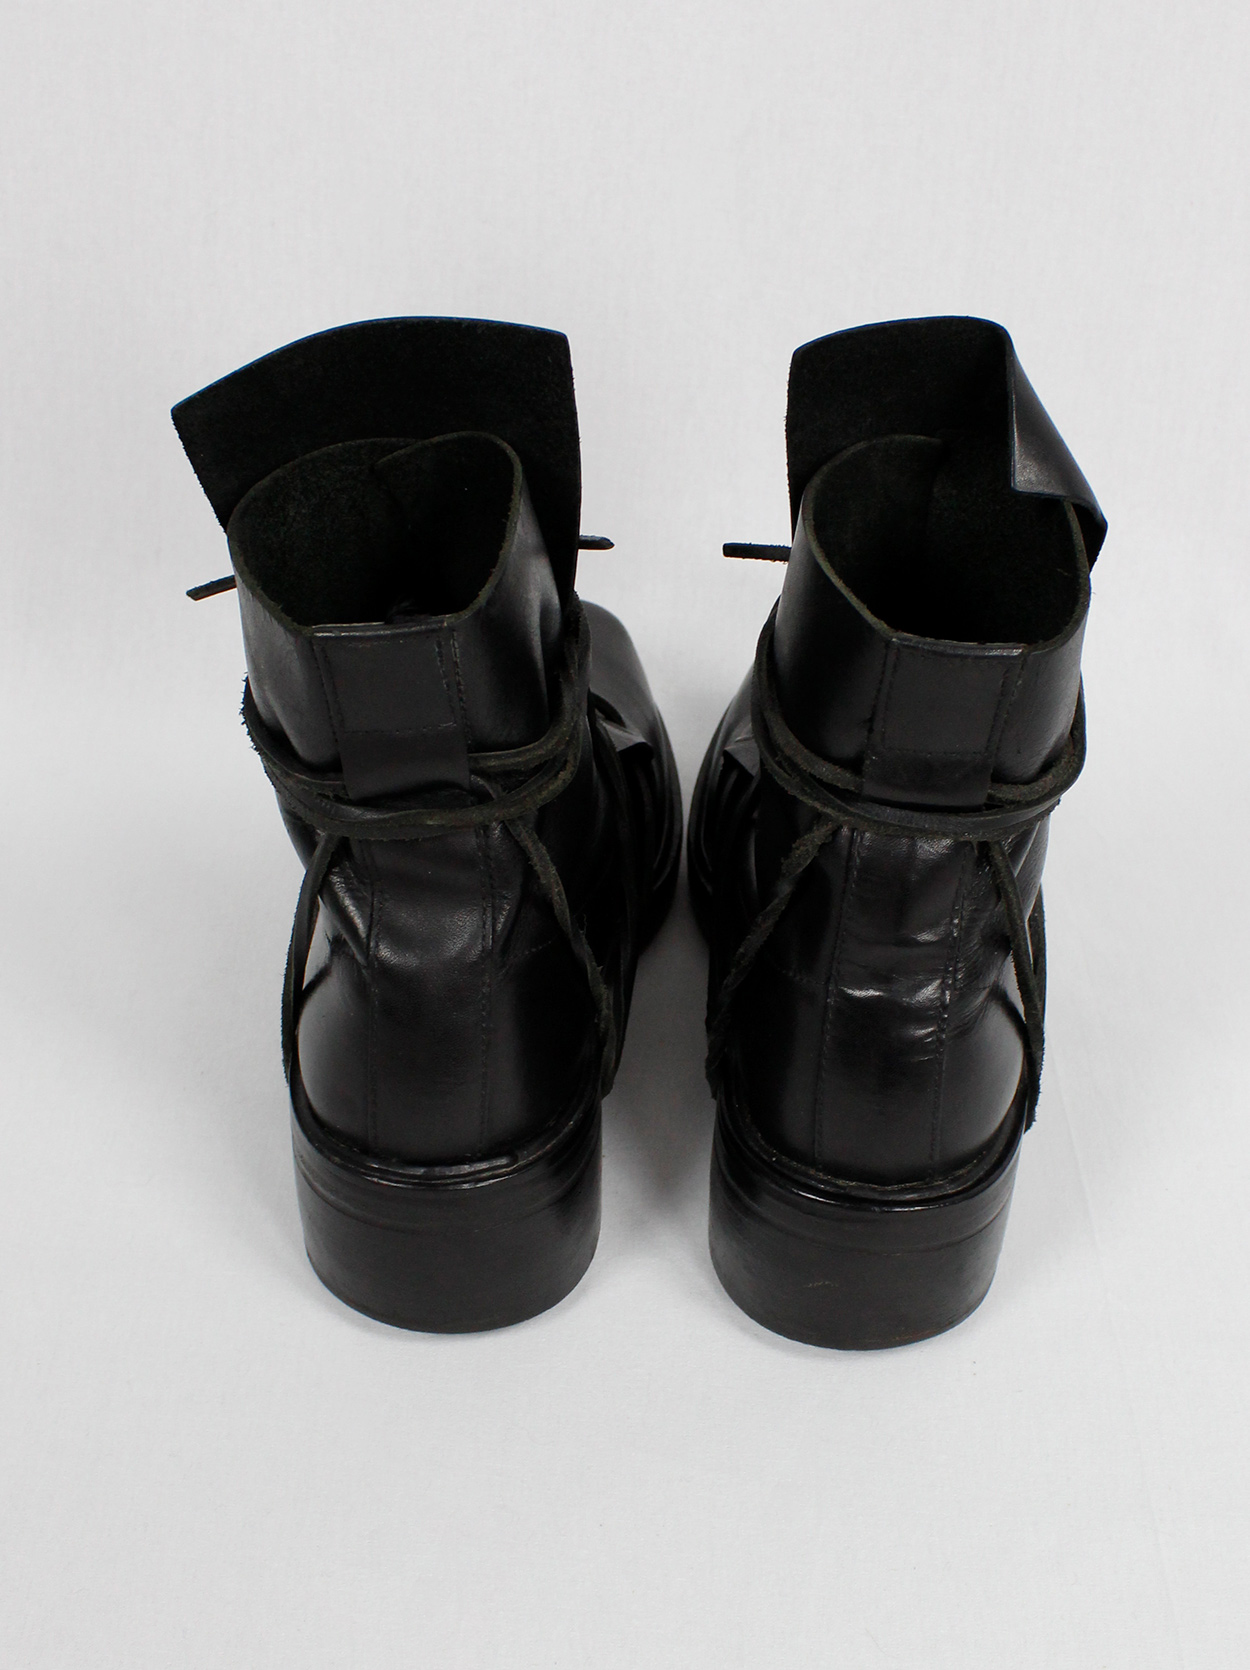 Dirk Bikkembergs black high mountaineering boots with laces through the ...